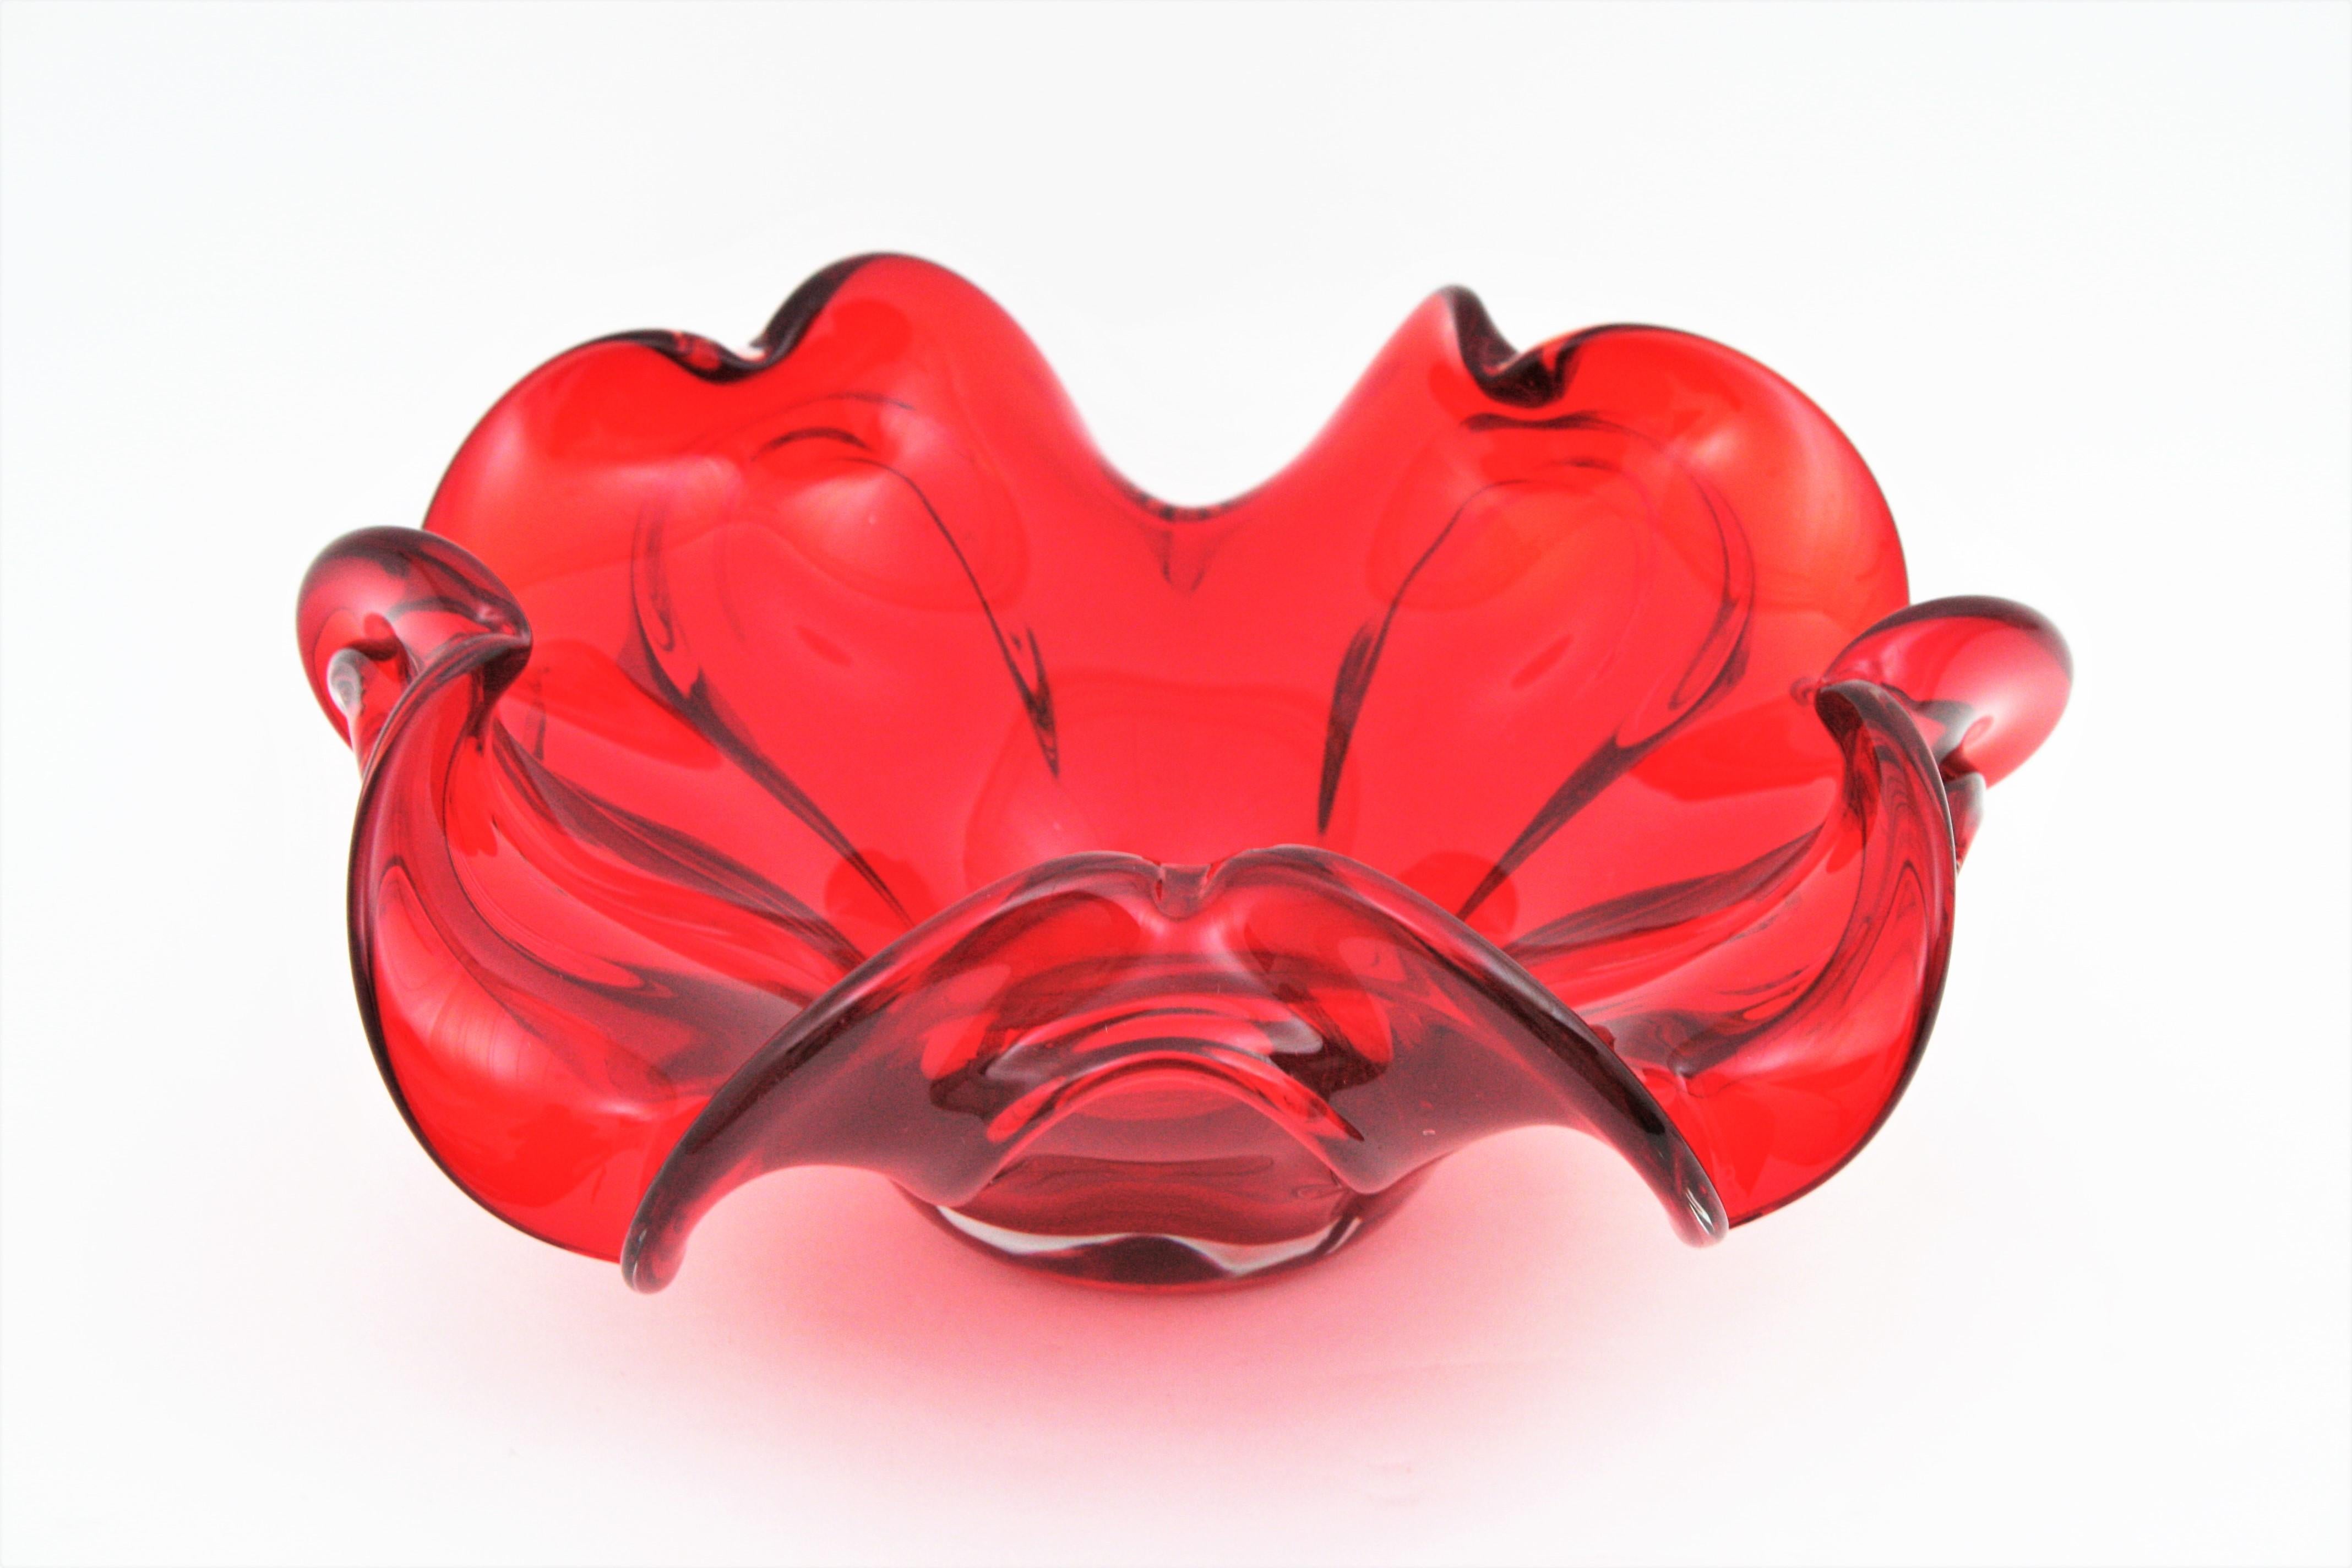 XXL Archimede Seguso Murano Ruby Red Sommerso Glass Flower Centerpiece Bowl 2